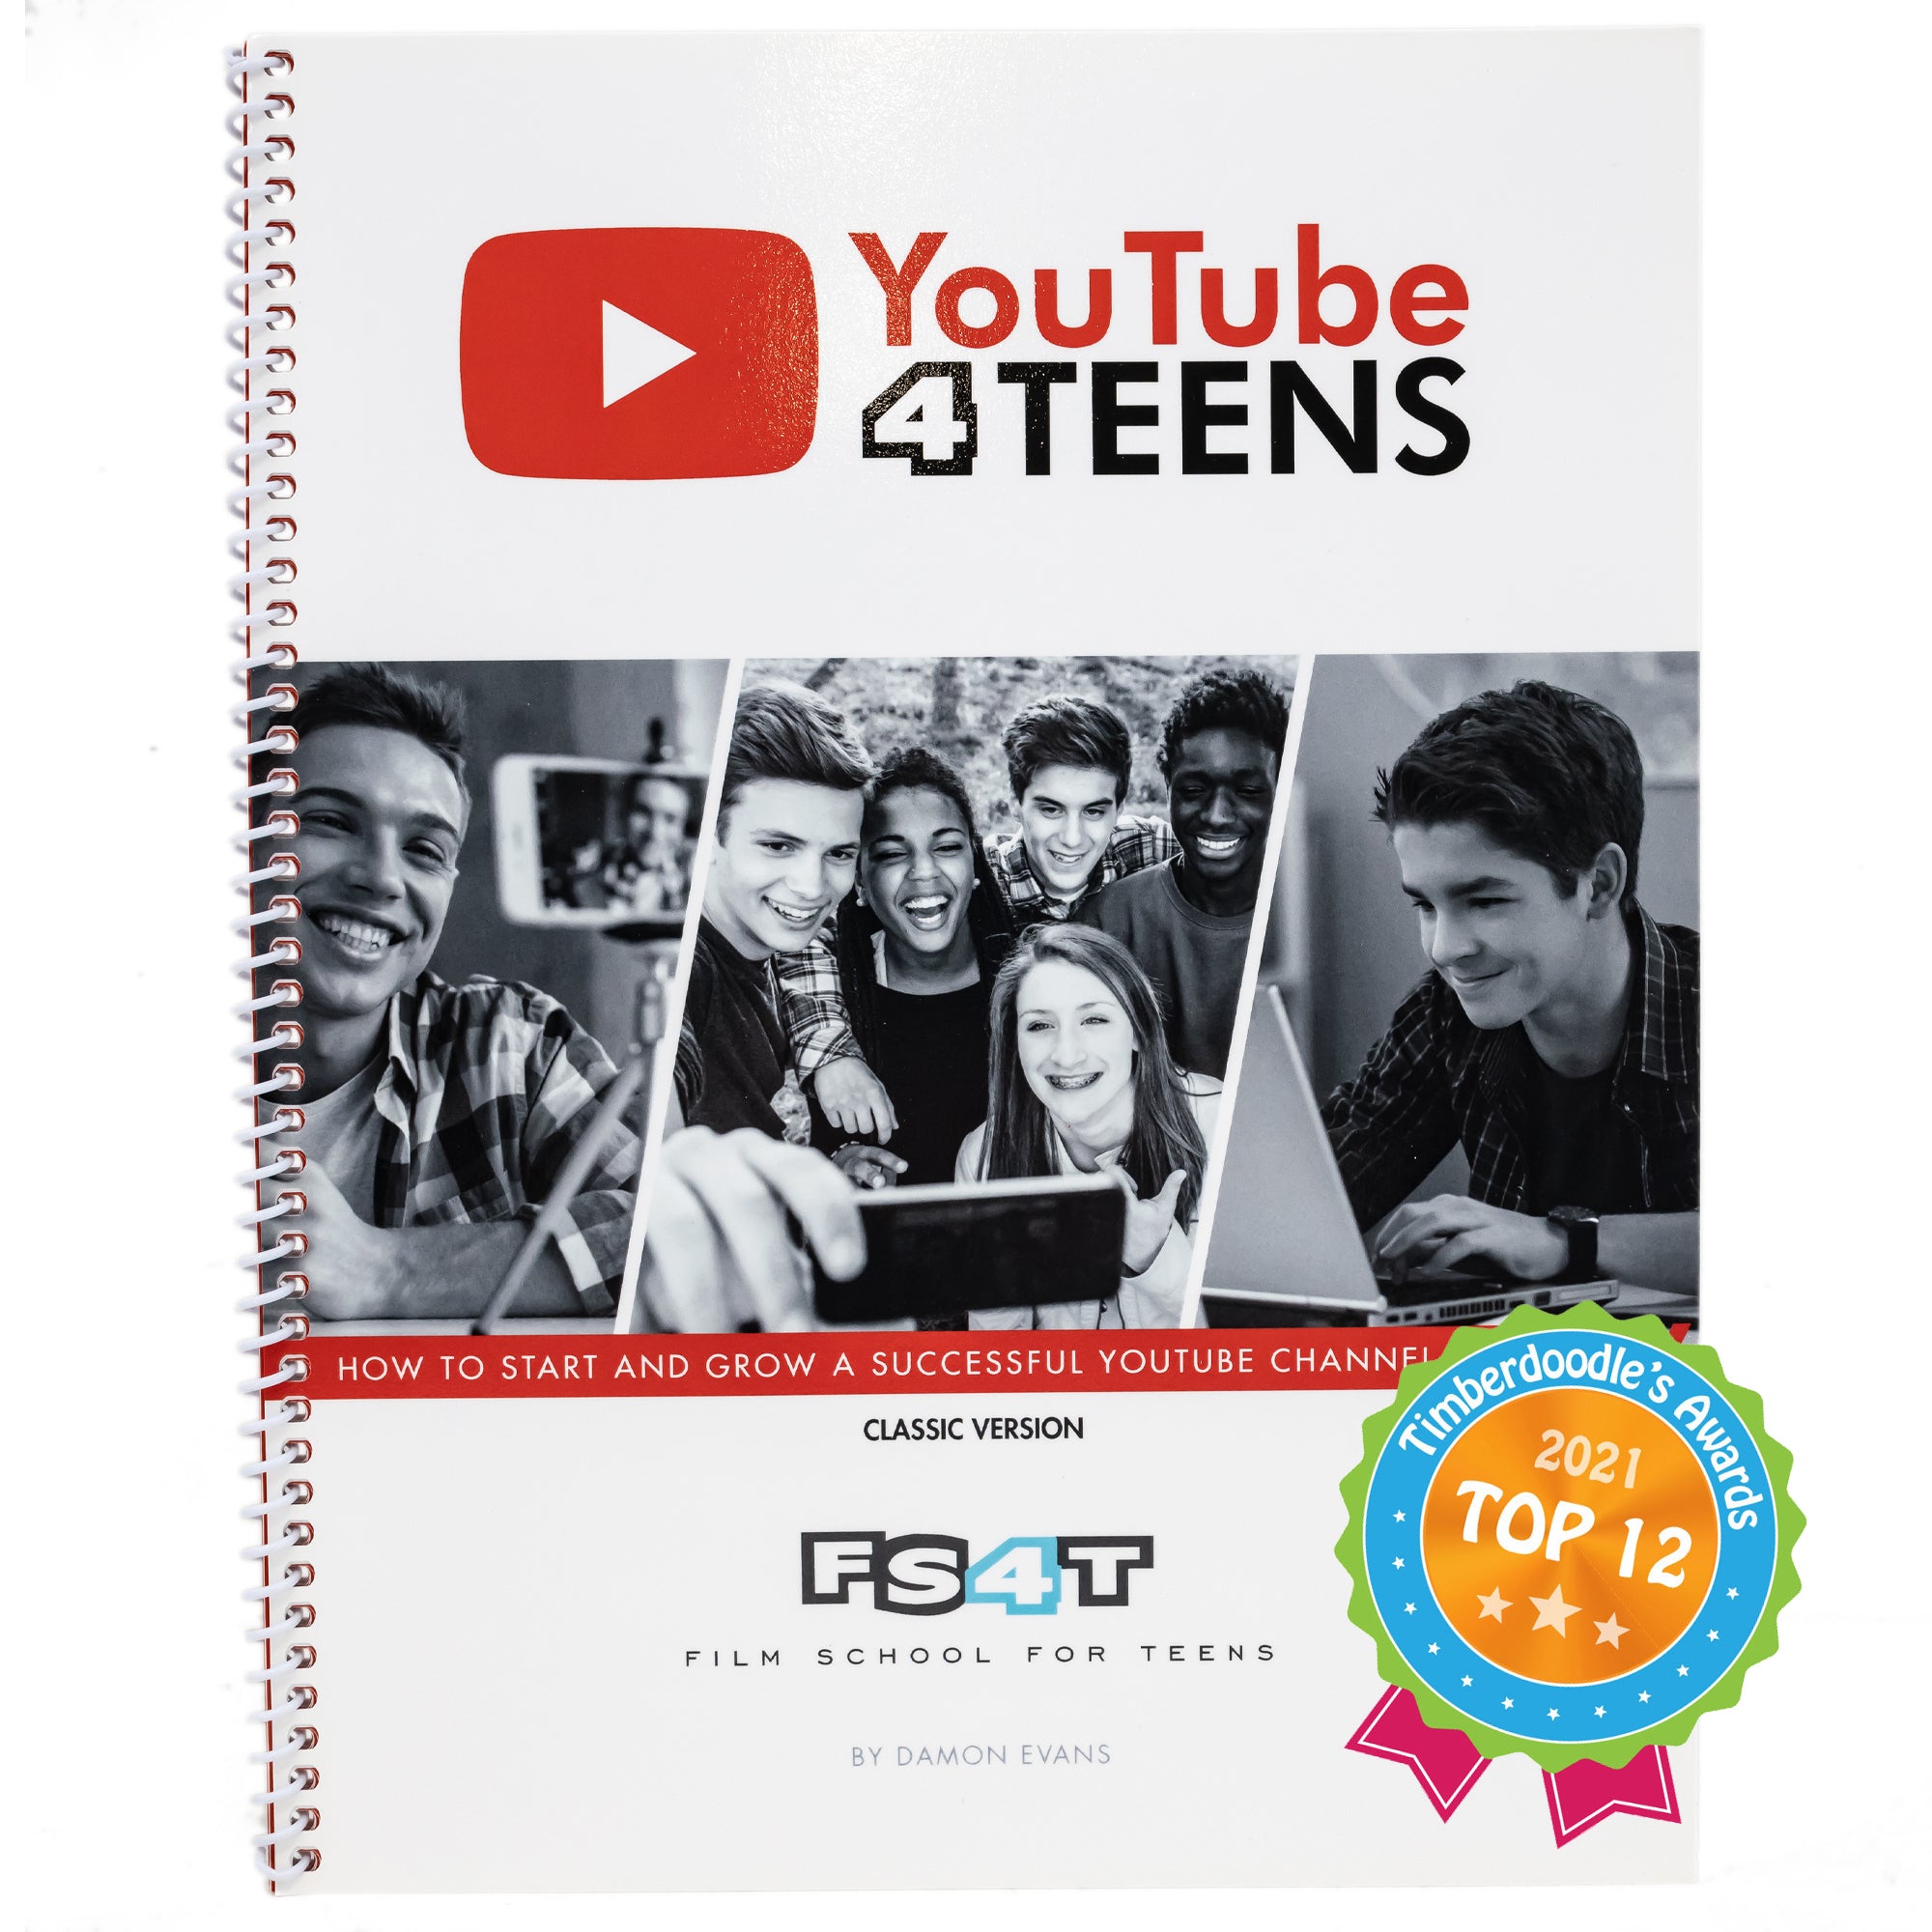 The YouTube 4 Teens workbook. It has white spiral binding cover. The title and logo are at the top in red and black. In the middle are 3 black and white photos. The left photo shows a smiling teenage boy taking a selfie. The middle shows a group of 5 smiling teenagers taking a picture of themselves with a cellphone. The right photo shows a smiling teenage boy typing at a laptop. Over the right-bottom of the picture is a "Top 12 Timberdoodle Award."